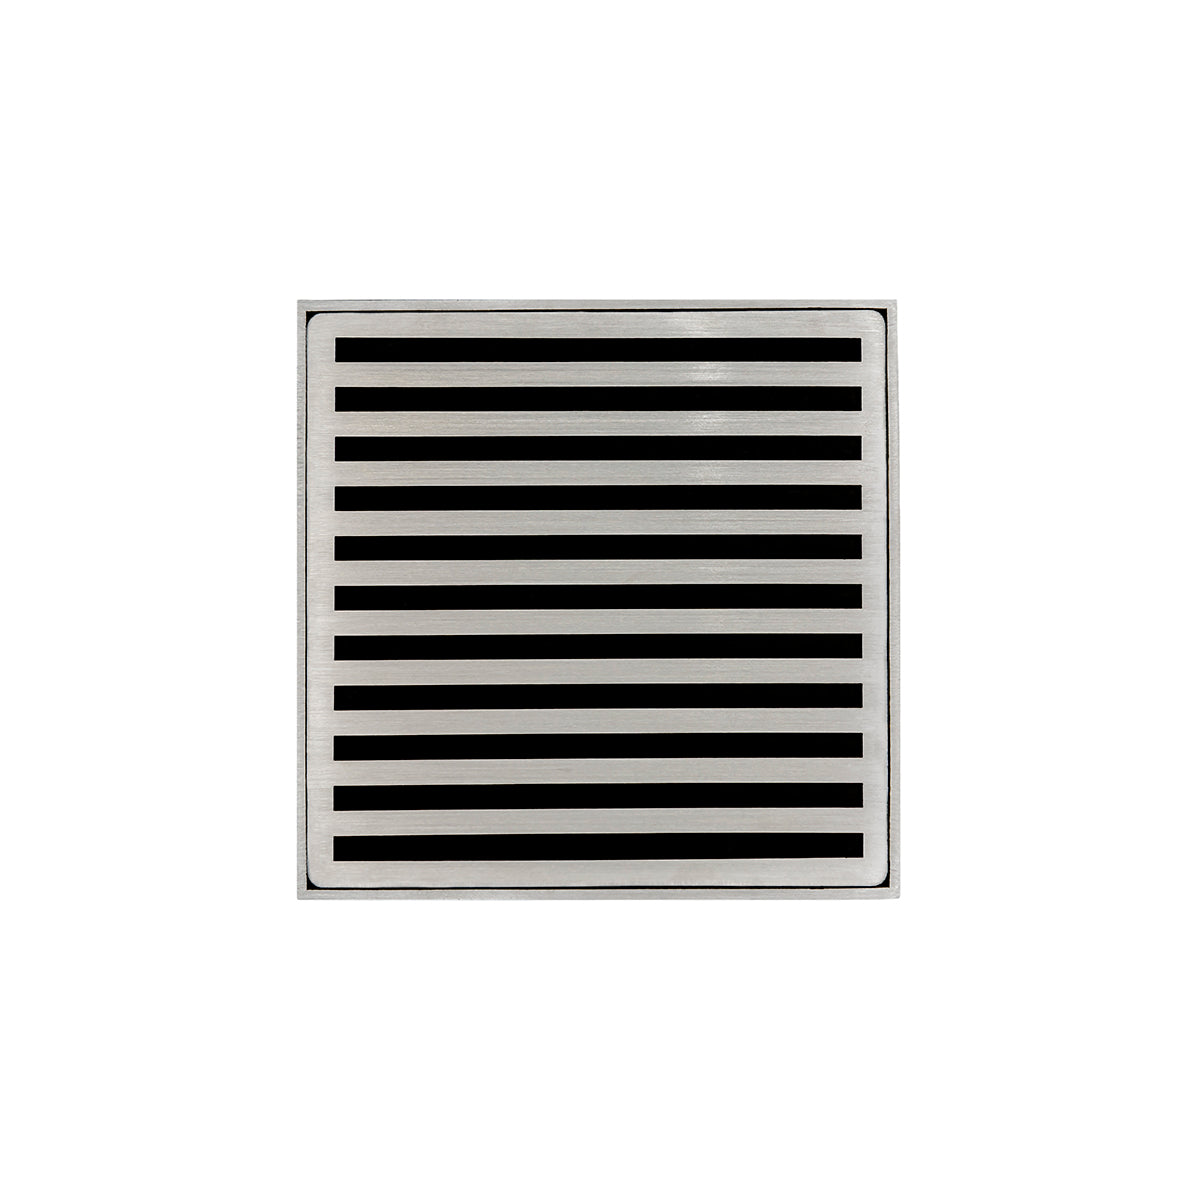 Infinity Drain 5" x 5" ND 5 Premium Center Drain Kit with Lines Pattern Decorative Plate with Cast Iron Drain Body for Hot Mop, 2" Outlet